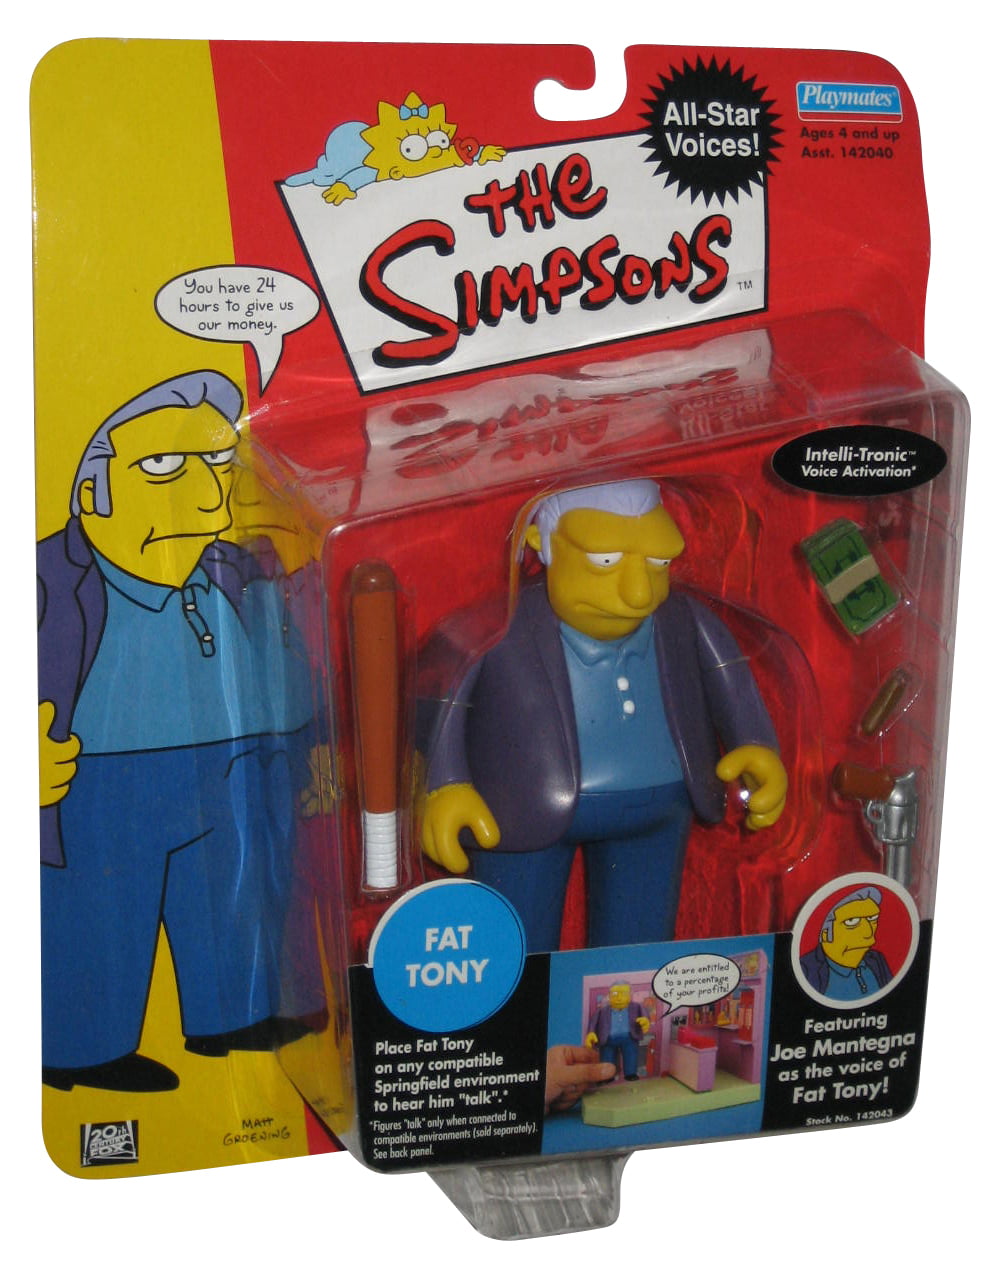 Playmates The Simpsons FAT TONY All-Star Voices World of Springfield Series 1 